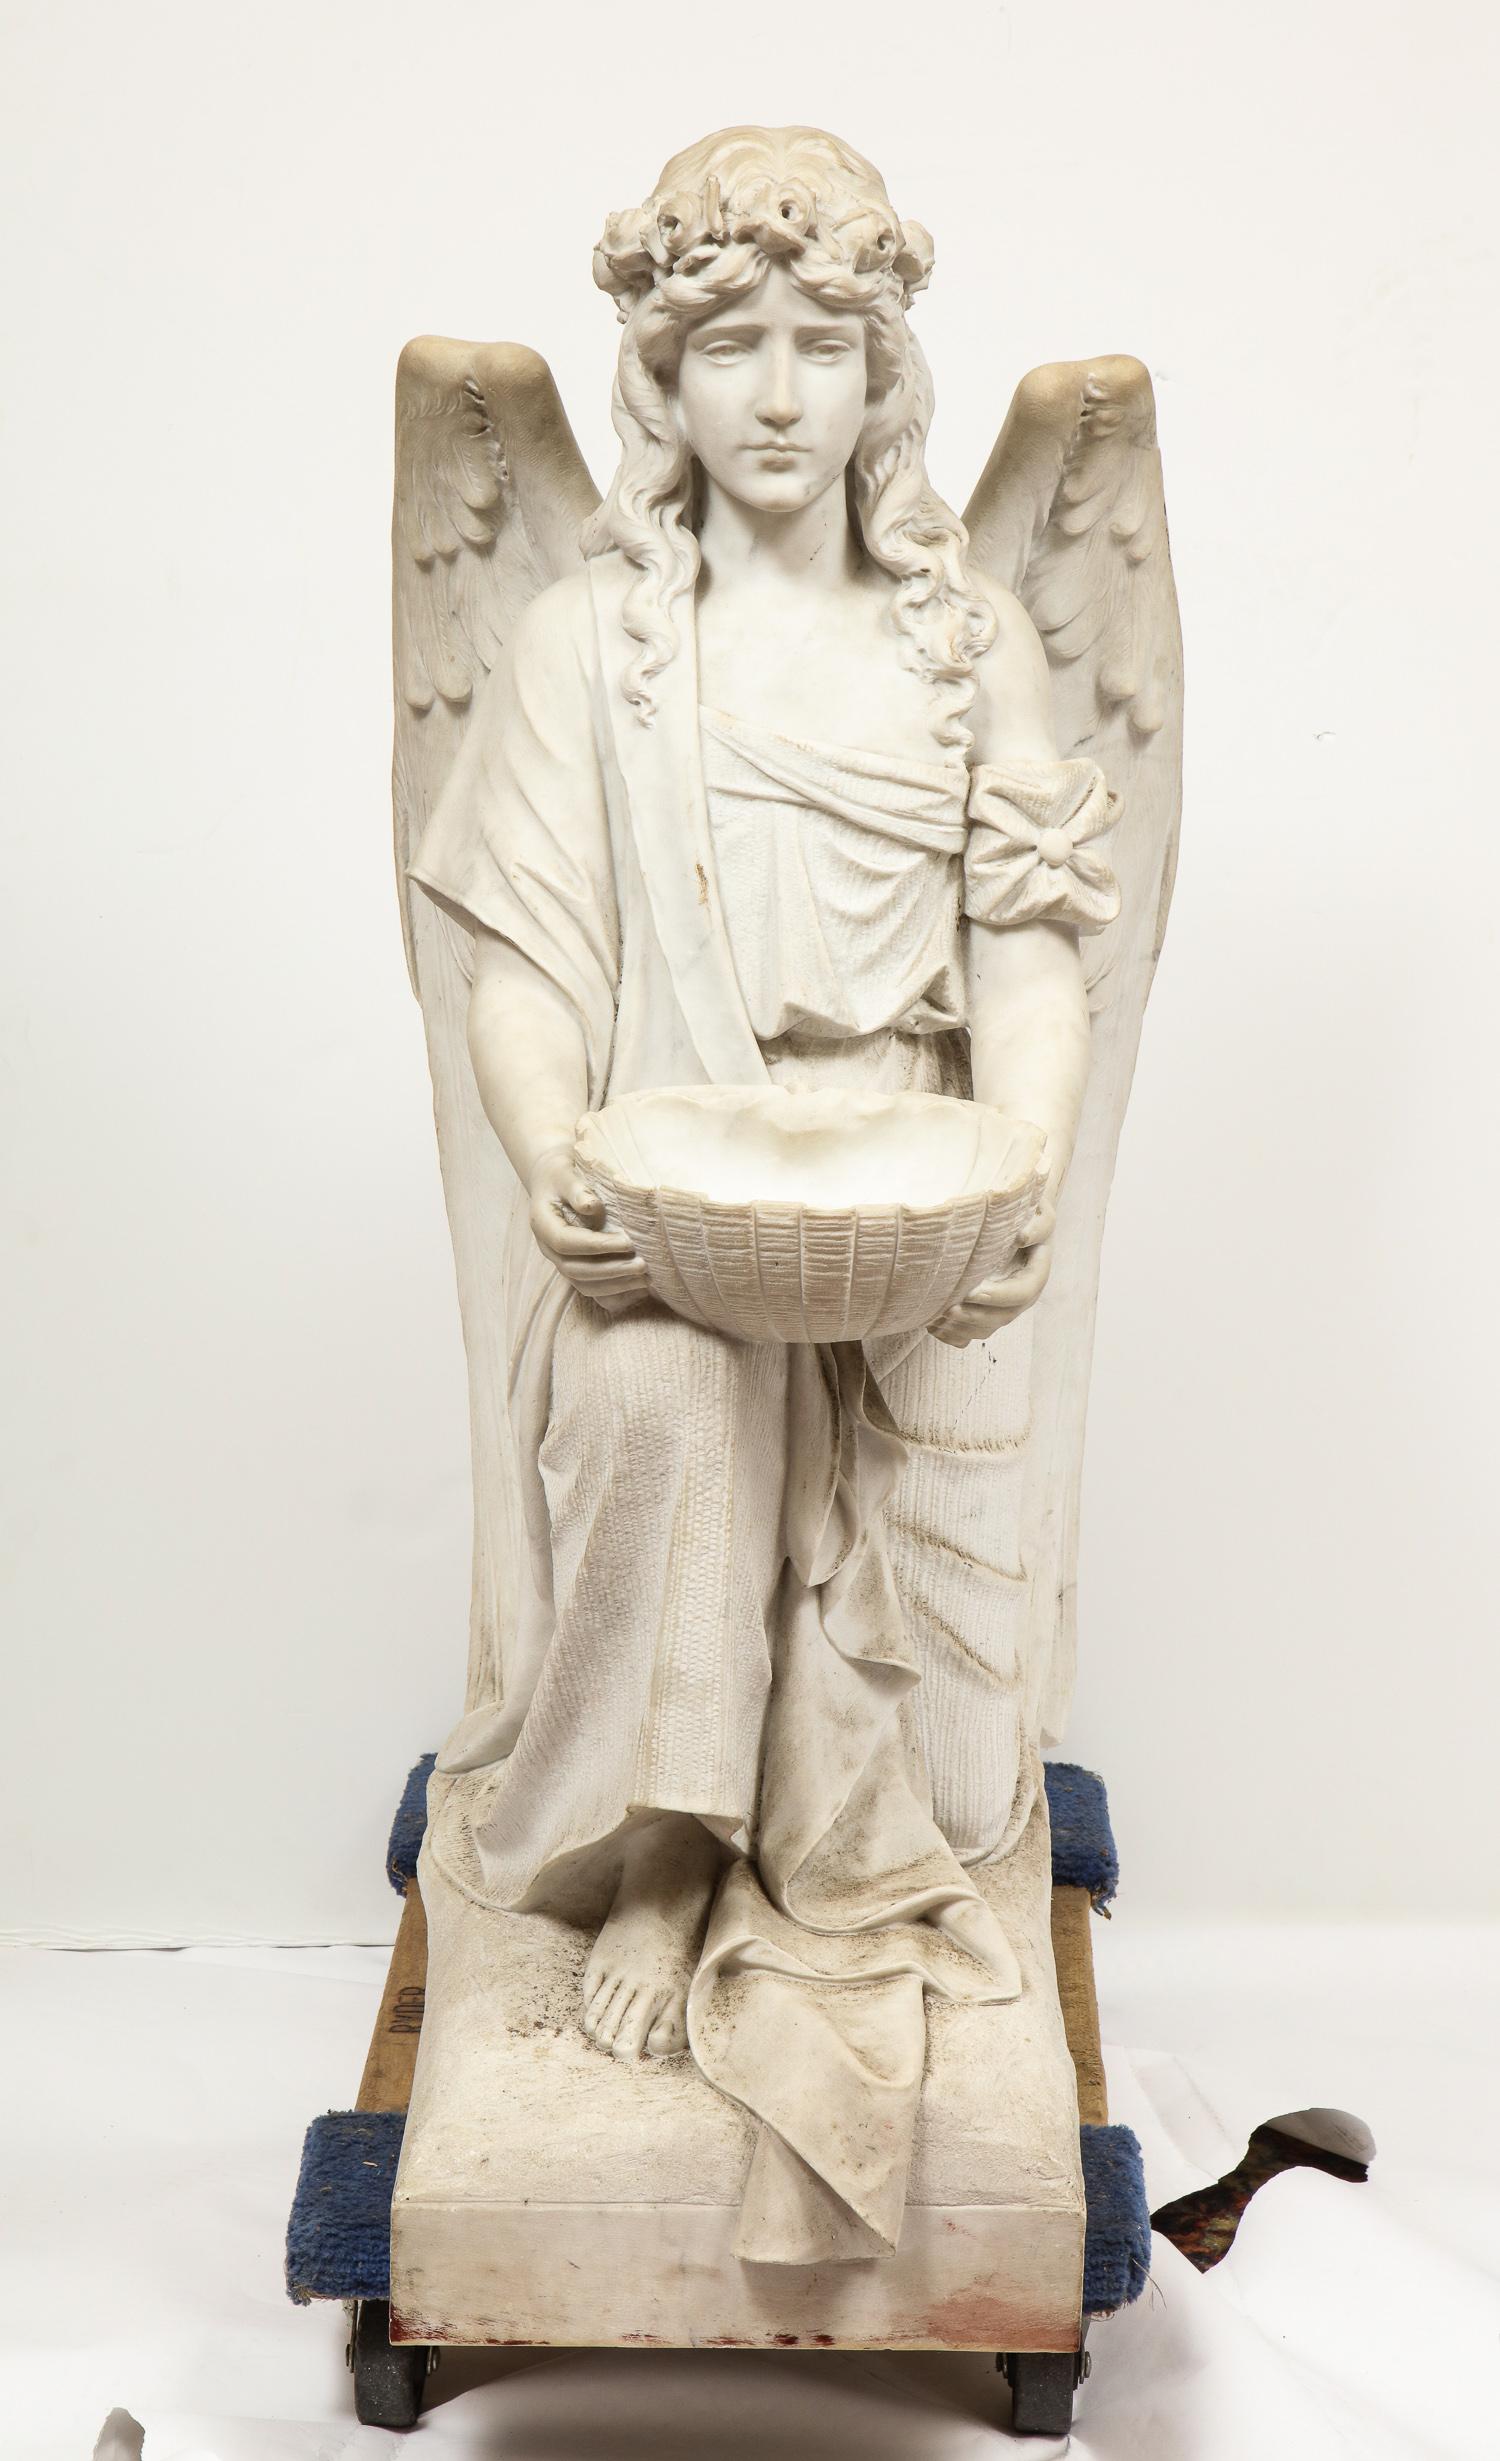 Monumental Italian white marble figure sculpture of a seated winged woman, Rome, 1870.

Depicting a seated female winged woman, holding a basket bowl on base.

Extremely finely carved by a master Italian sculptor.

Measures: 45